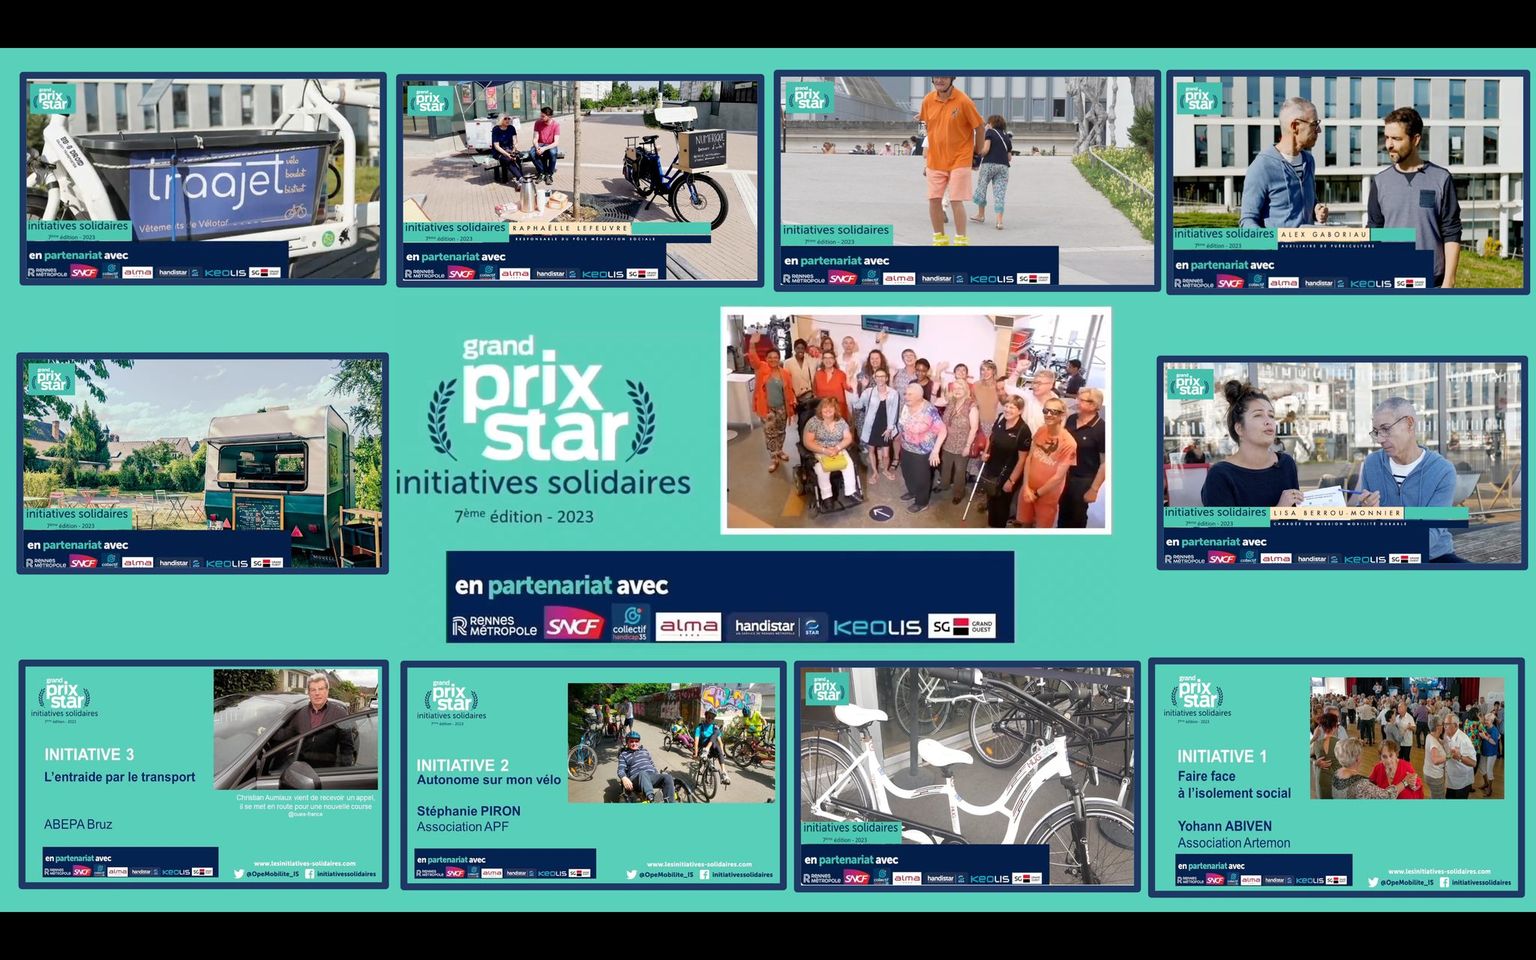 You are currently viewing Le Grand Prix Star – Mobilité – Les initiatives solidaires